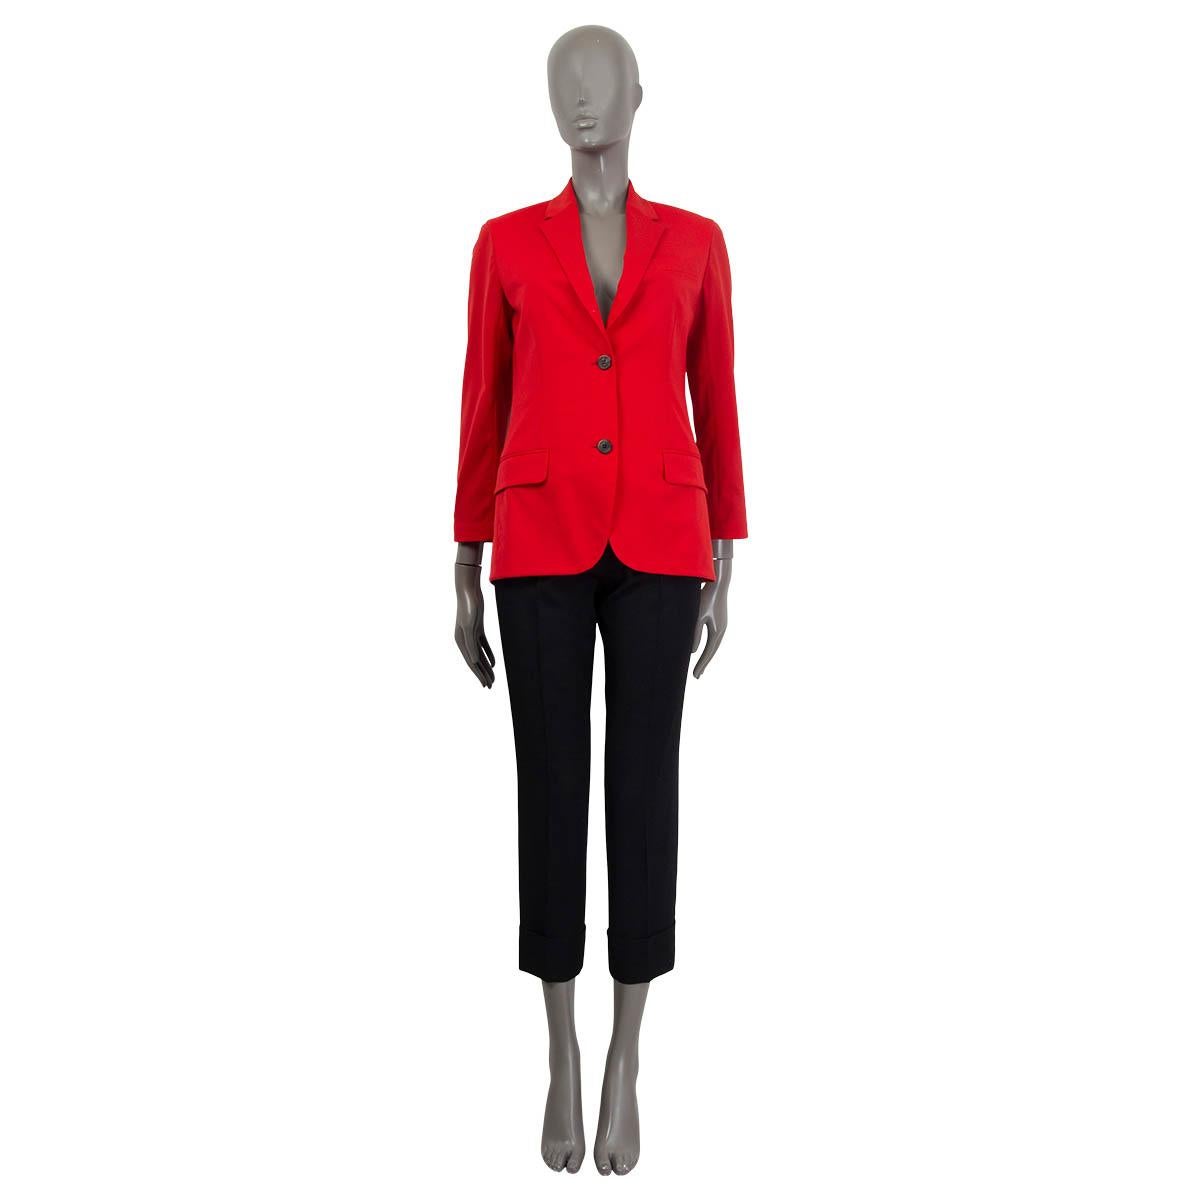 100% authentic Hermès notch collar blazer in red virgin wool (100%). Features slits at the back, a chest pocket and two sewn shut flap pockets on the front. Opens with two buttons on the front. Unlined. The inside seam of the hemline comes off, can